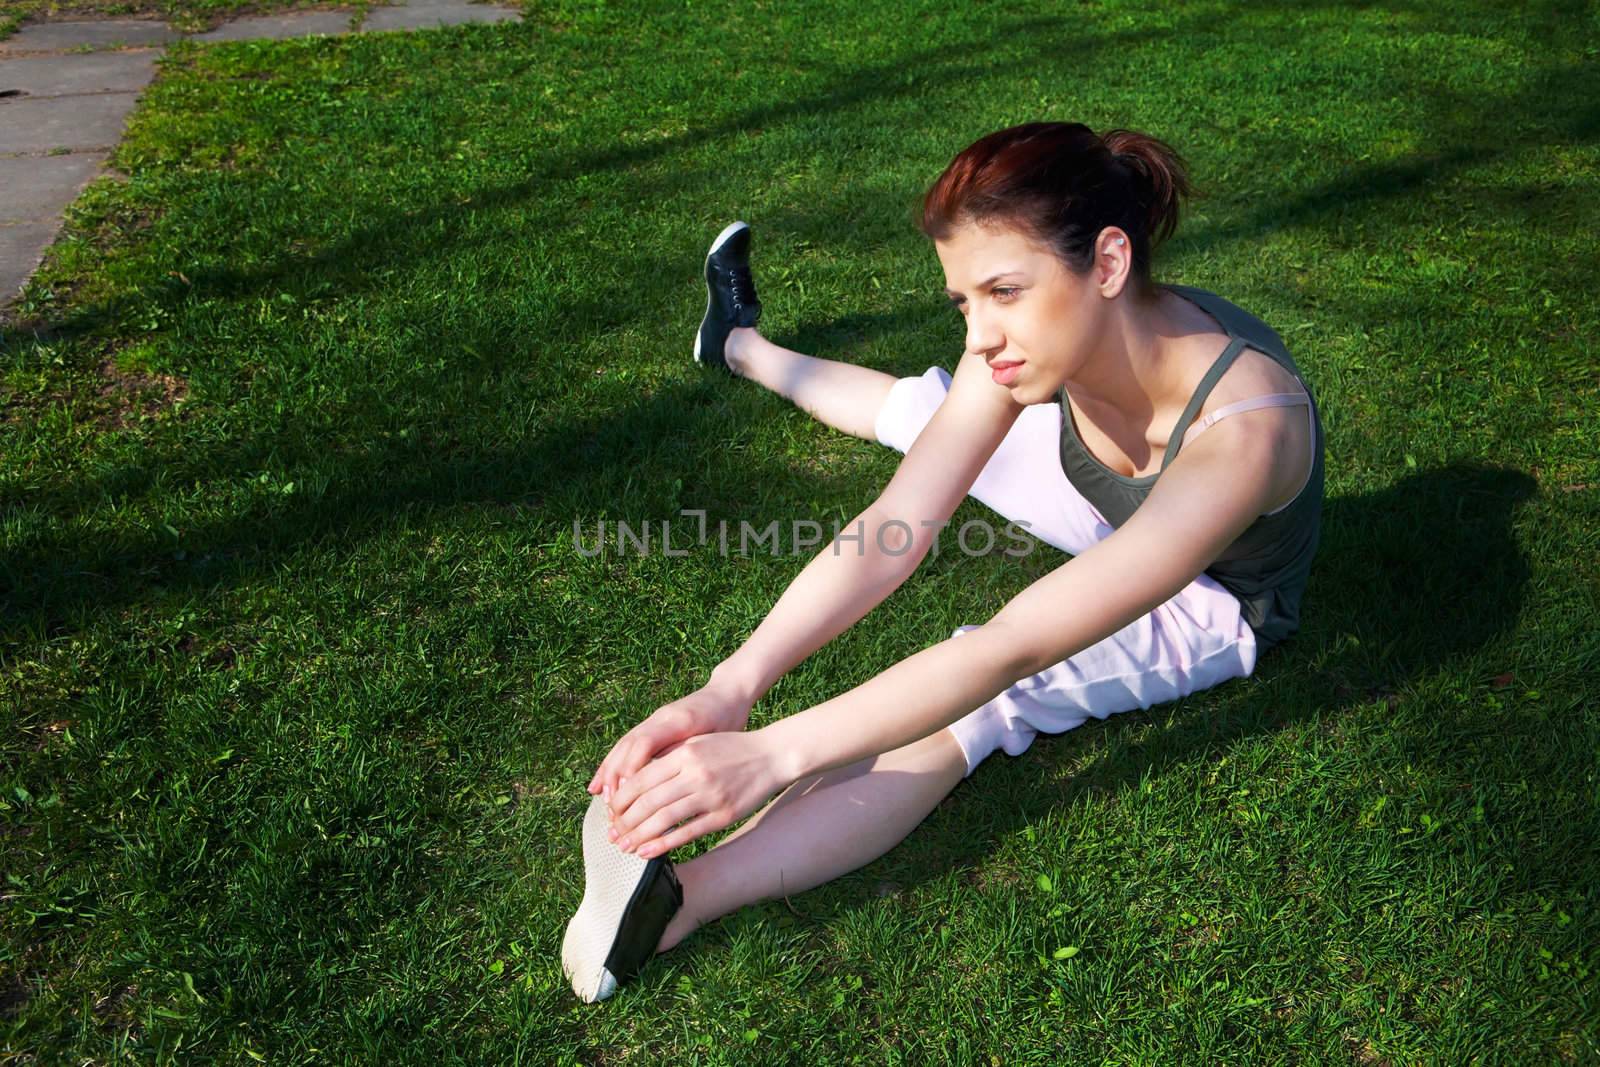 Teenage girl stretching on grass in spring